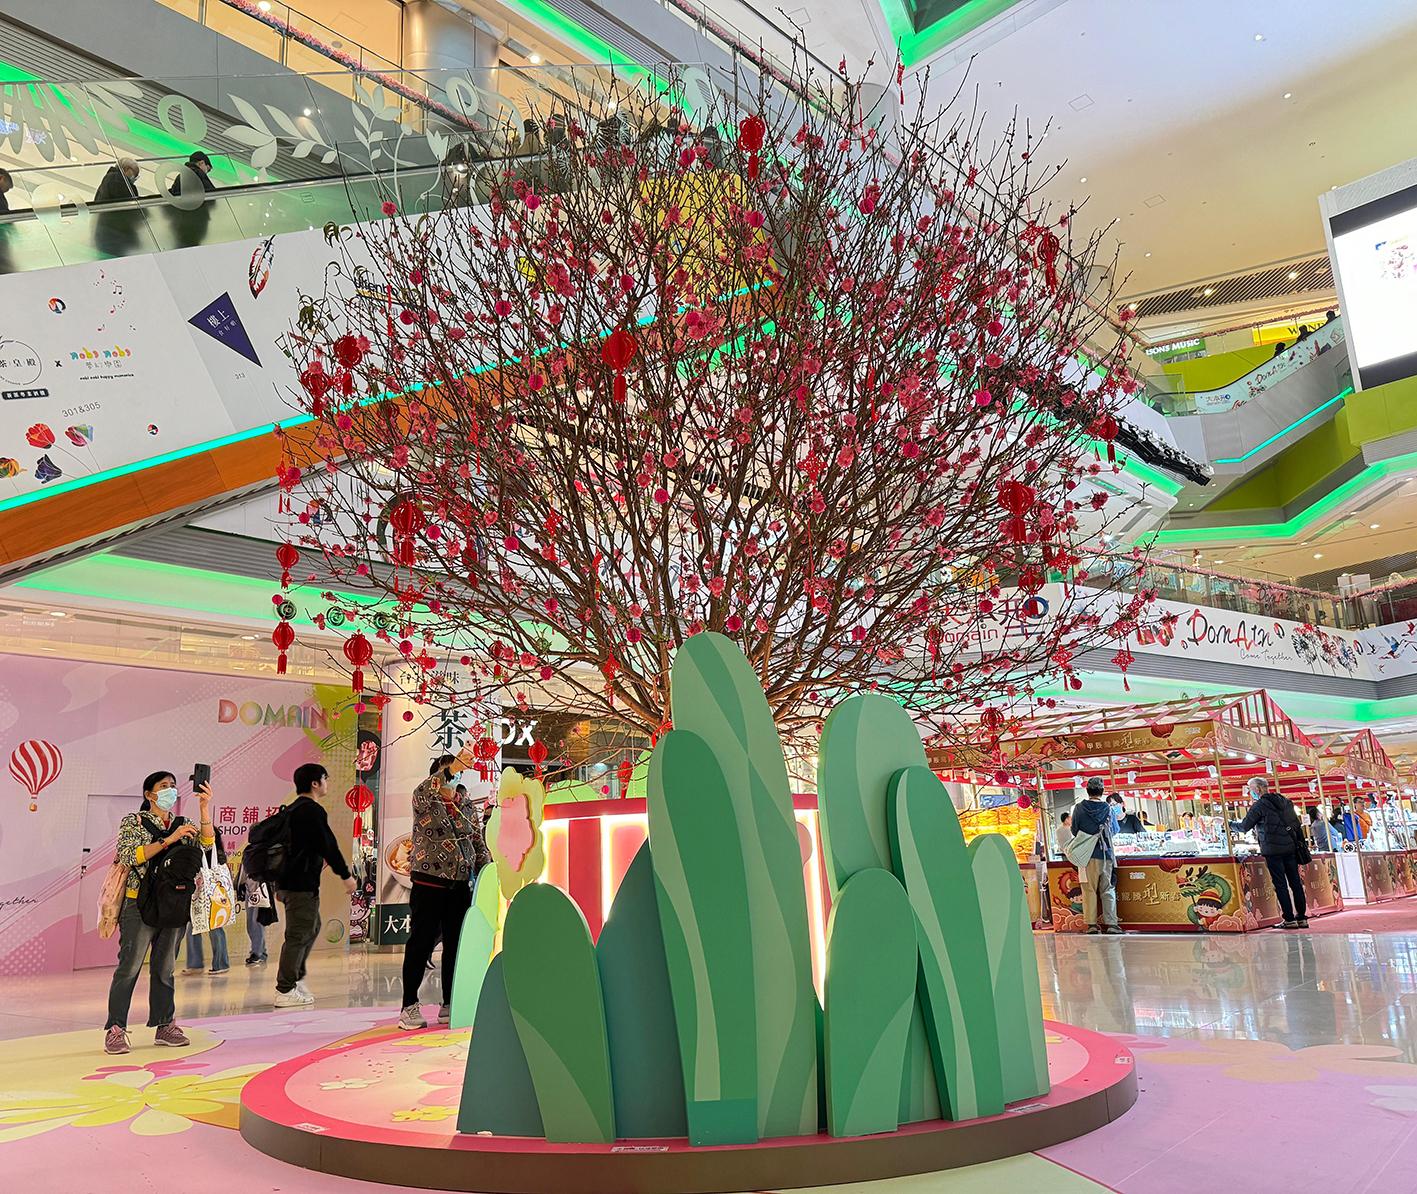 To welcome the Year of the Dragon, the Hong Kong Housing Authority has arranged celebratory events for shoppers to celebrate the new year and help boost the economy. Photo shows a 4-metre-tall real peach tree with blossoms at the ground floor atrium of the regional shopping centre, Domain, in Yau Tong.